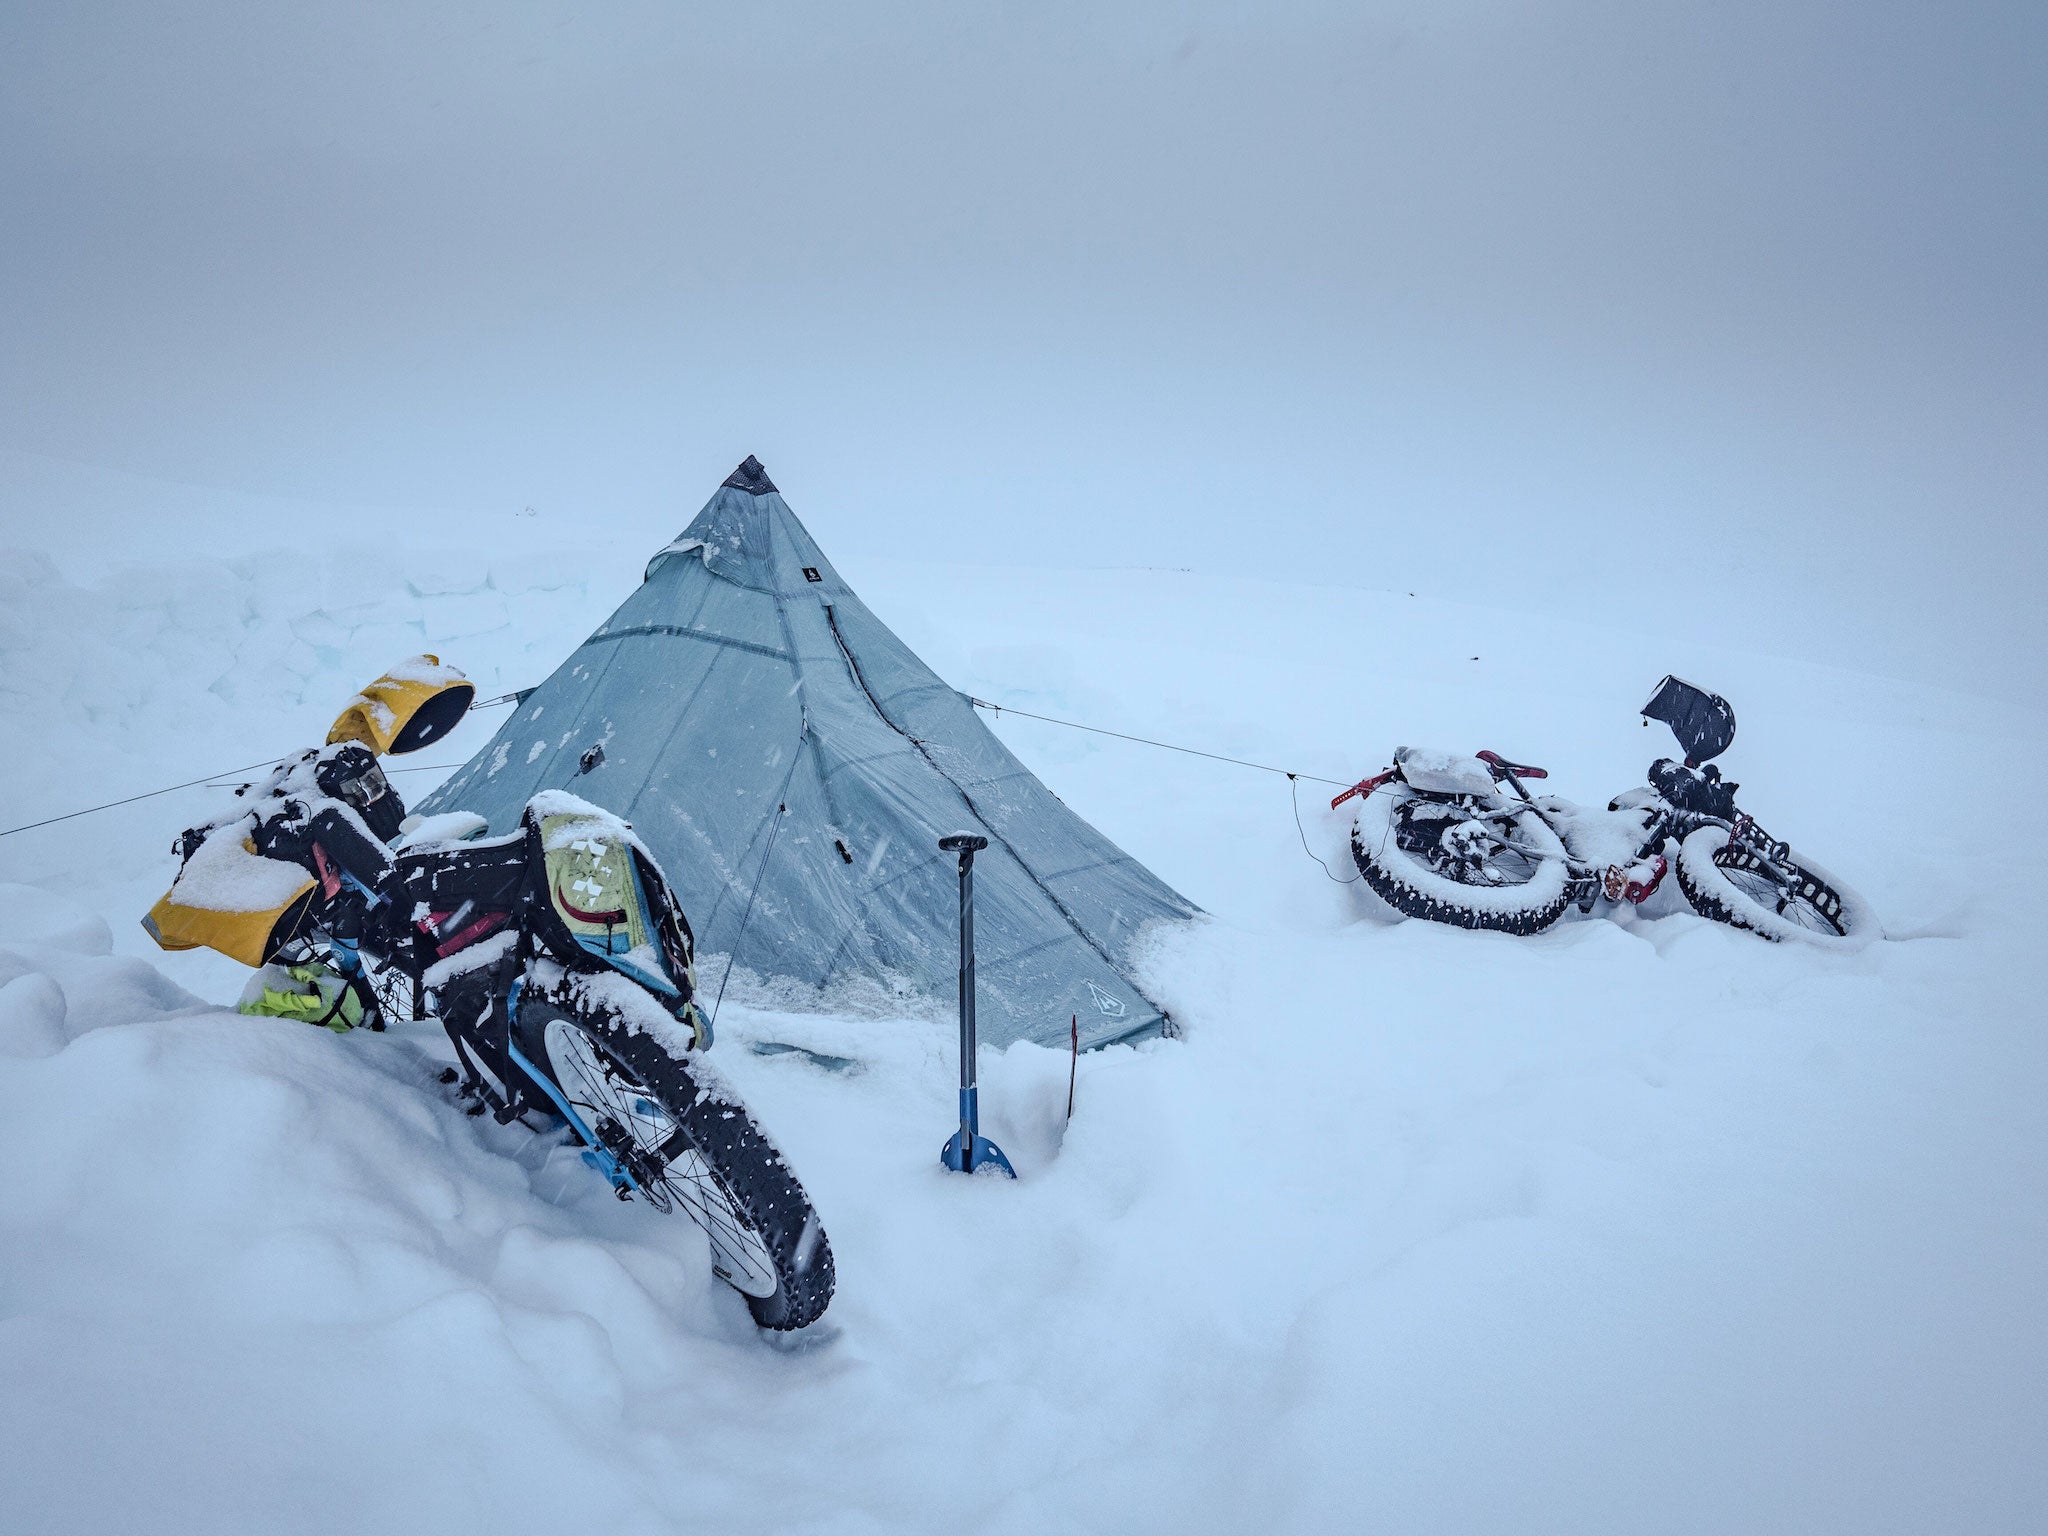 Ultralight tent surrounded by fresh snow